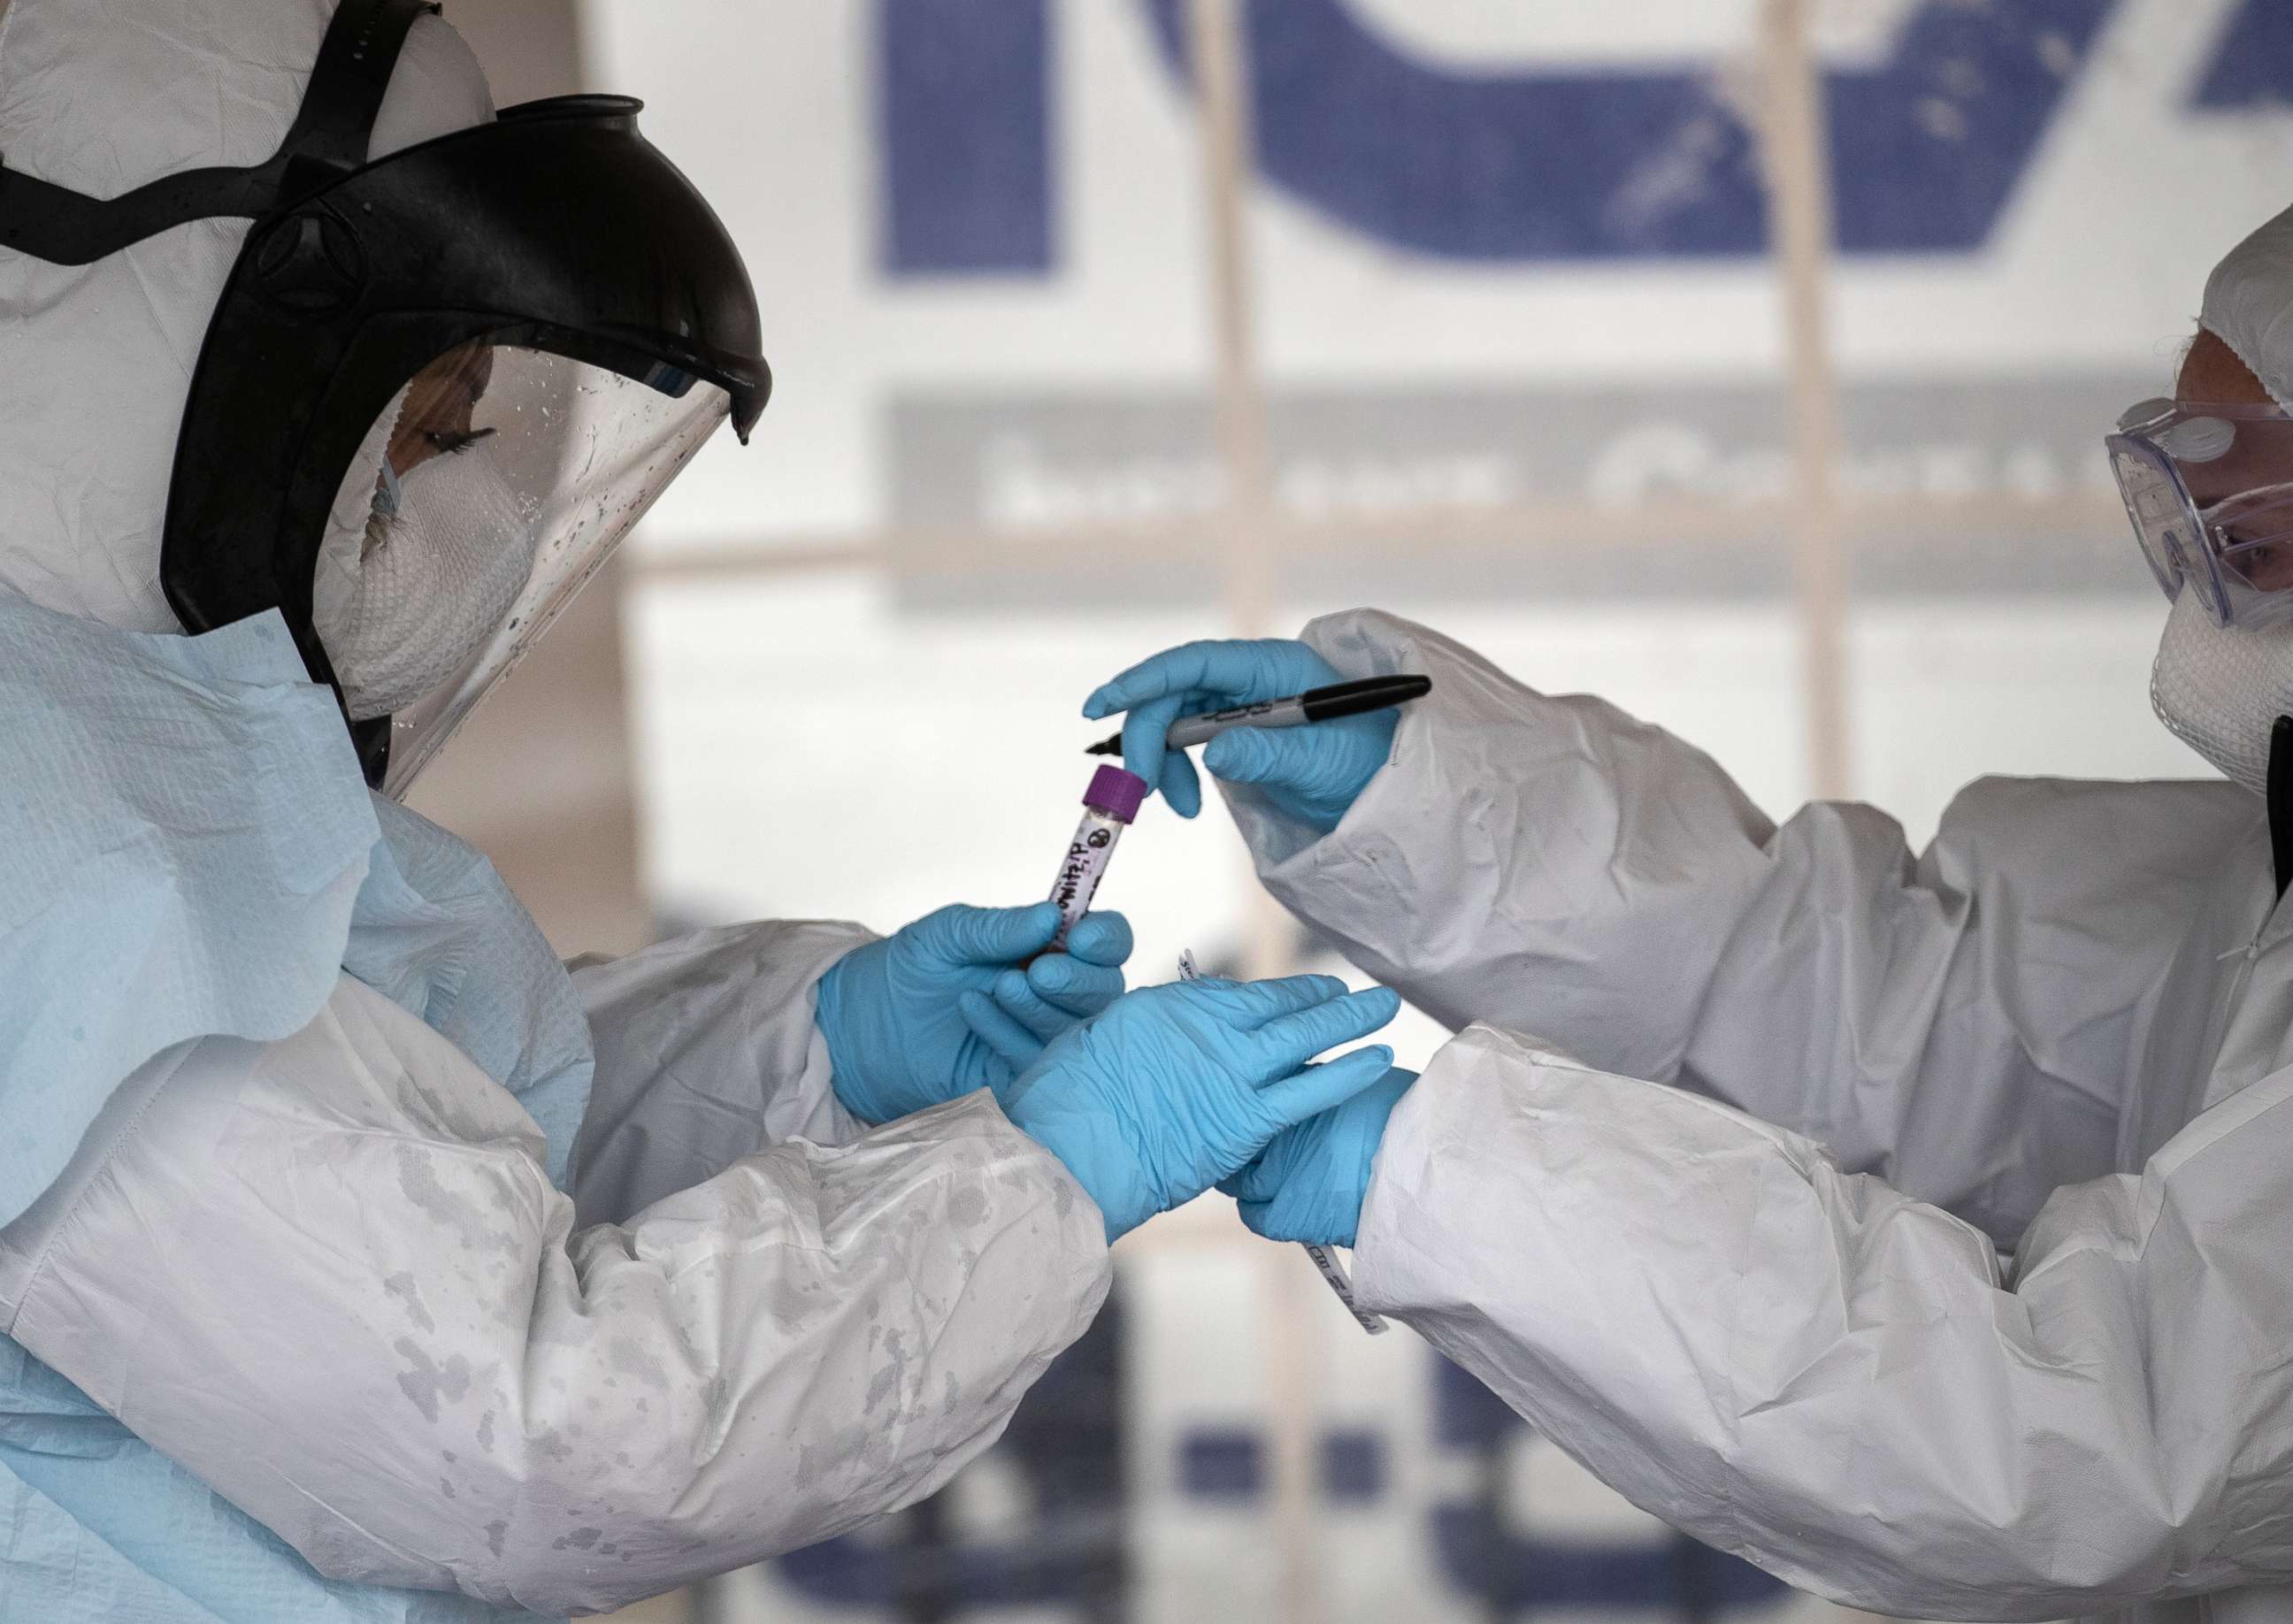 PHOTO: Health workers dressed in personal protective equipment (PPE) handle a coronavirus test at a drive-thru testing station in Stamford, Connecticut.